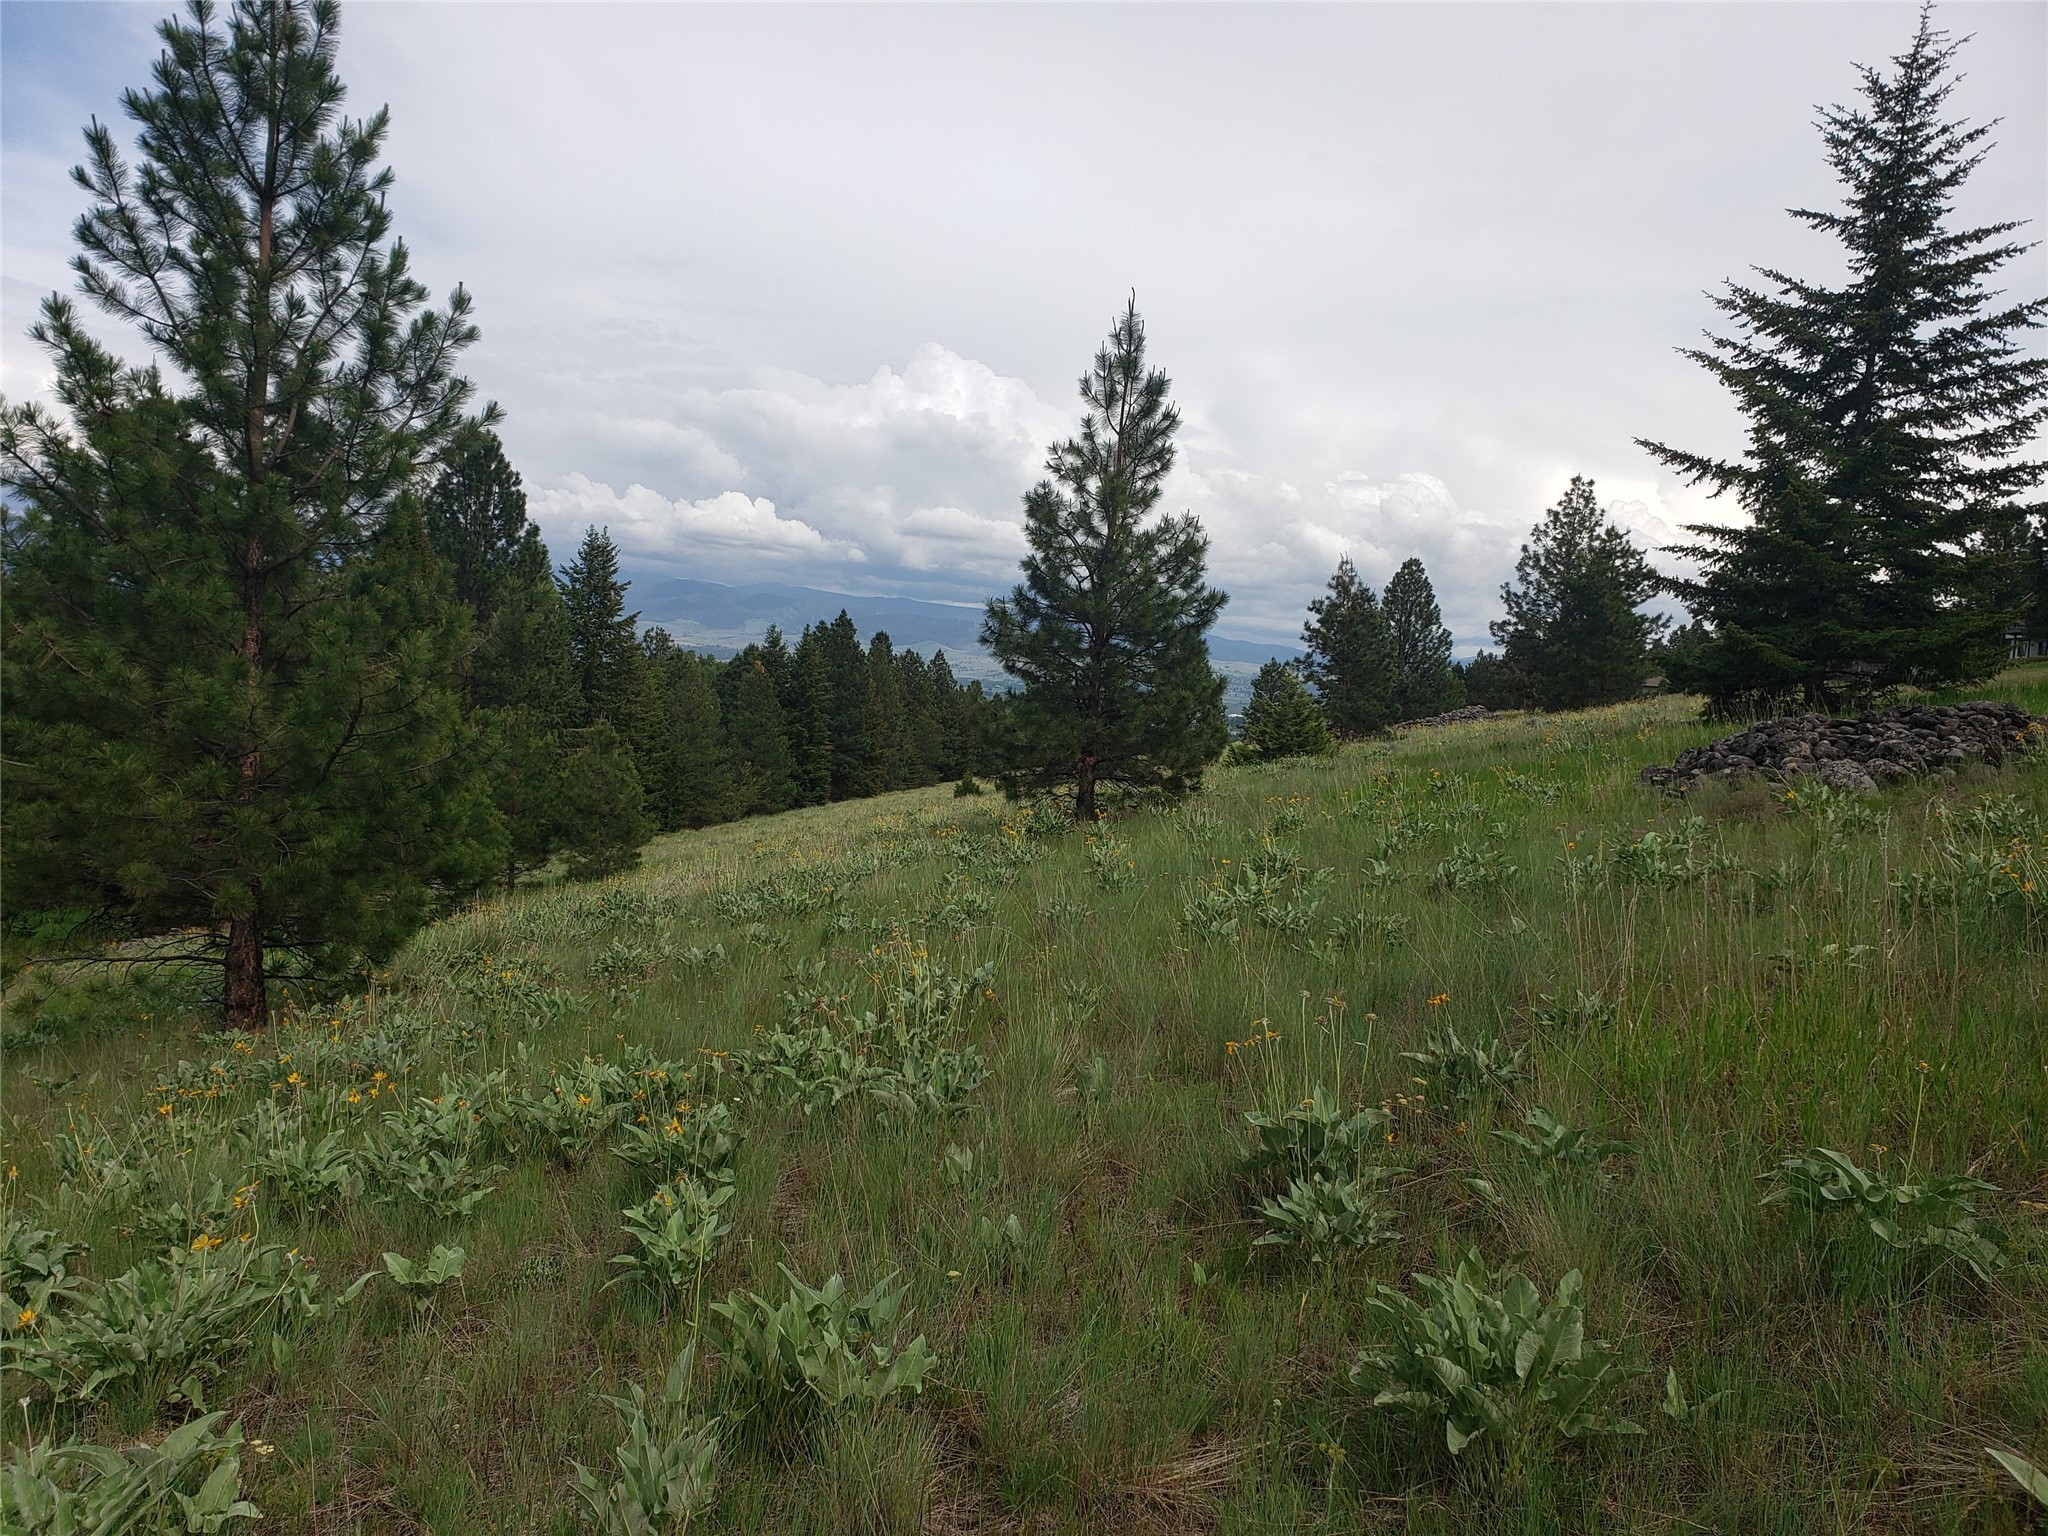 Just west of Hamilton off Oertli Road and below West Hills Way subdivision. An ideal location near town for multiple daylight basement homesites, subject to being approved by Ravalli County. A mix of views & privacy. The parcel is long east/west and narrower. A rare find & possible opportunity!